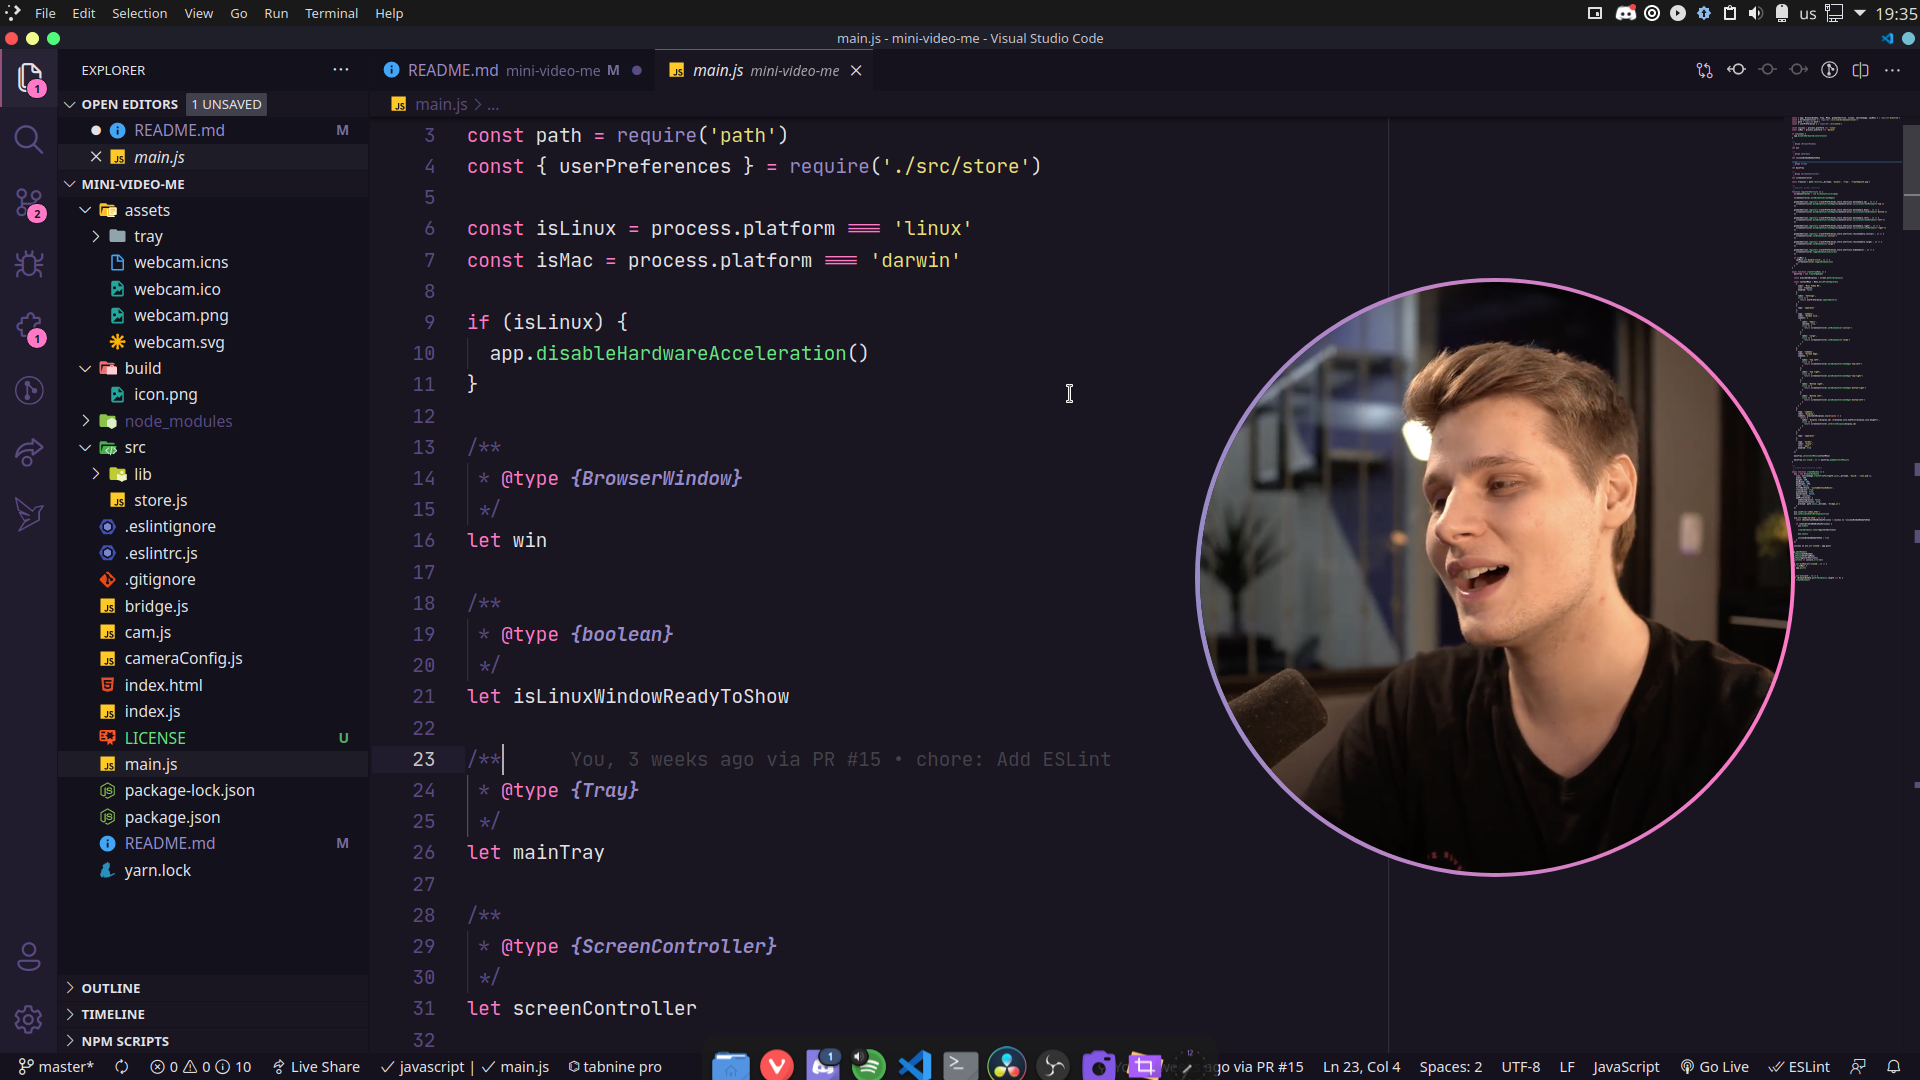 Sample preview running the app showing Diego Fernandes happy on the app screen with Visual Studio Code open in the background